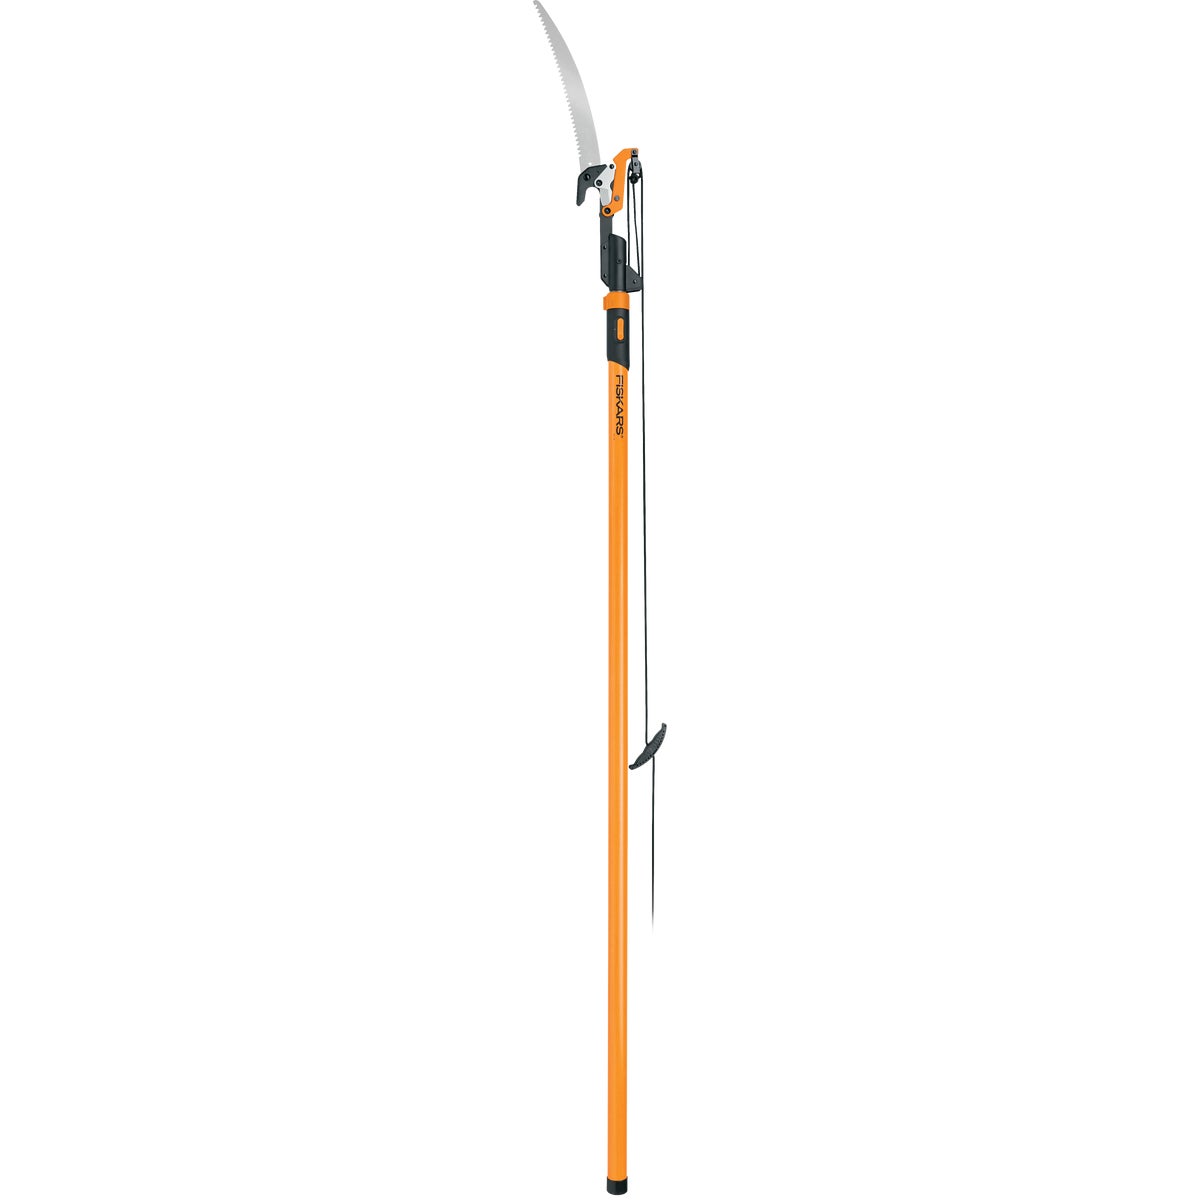 Item 768588, Extendable pole saw and pruner extends from 7 Ft. to 14 Ft.